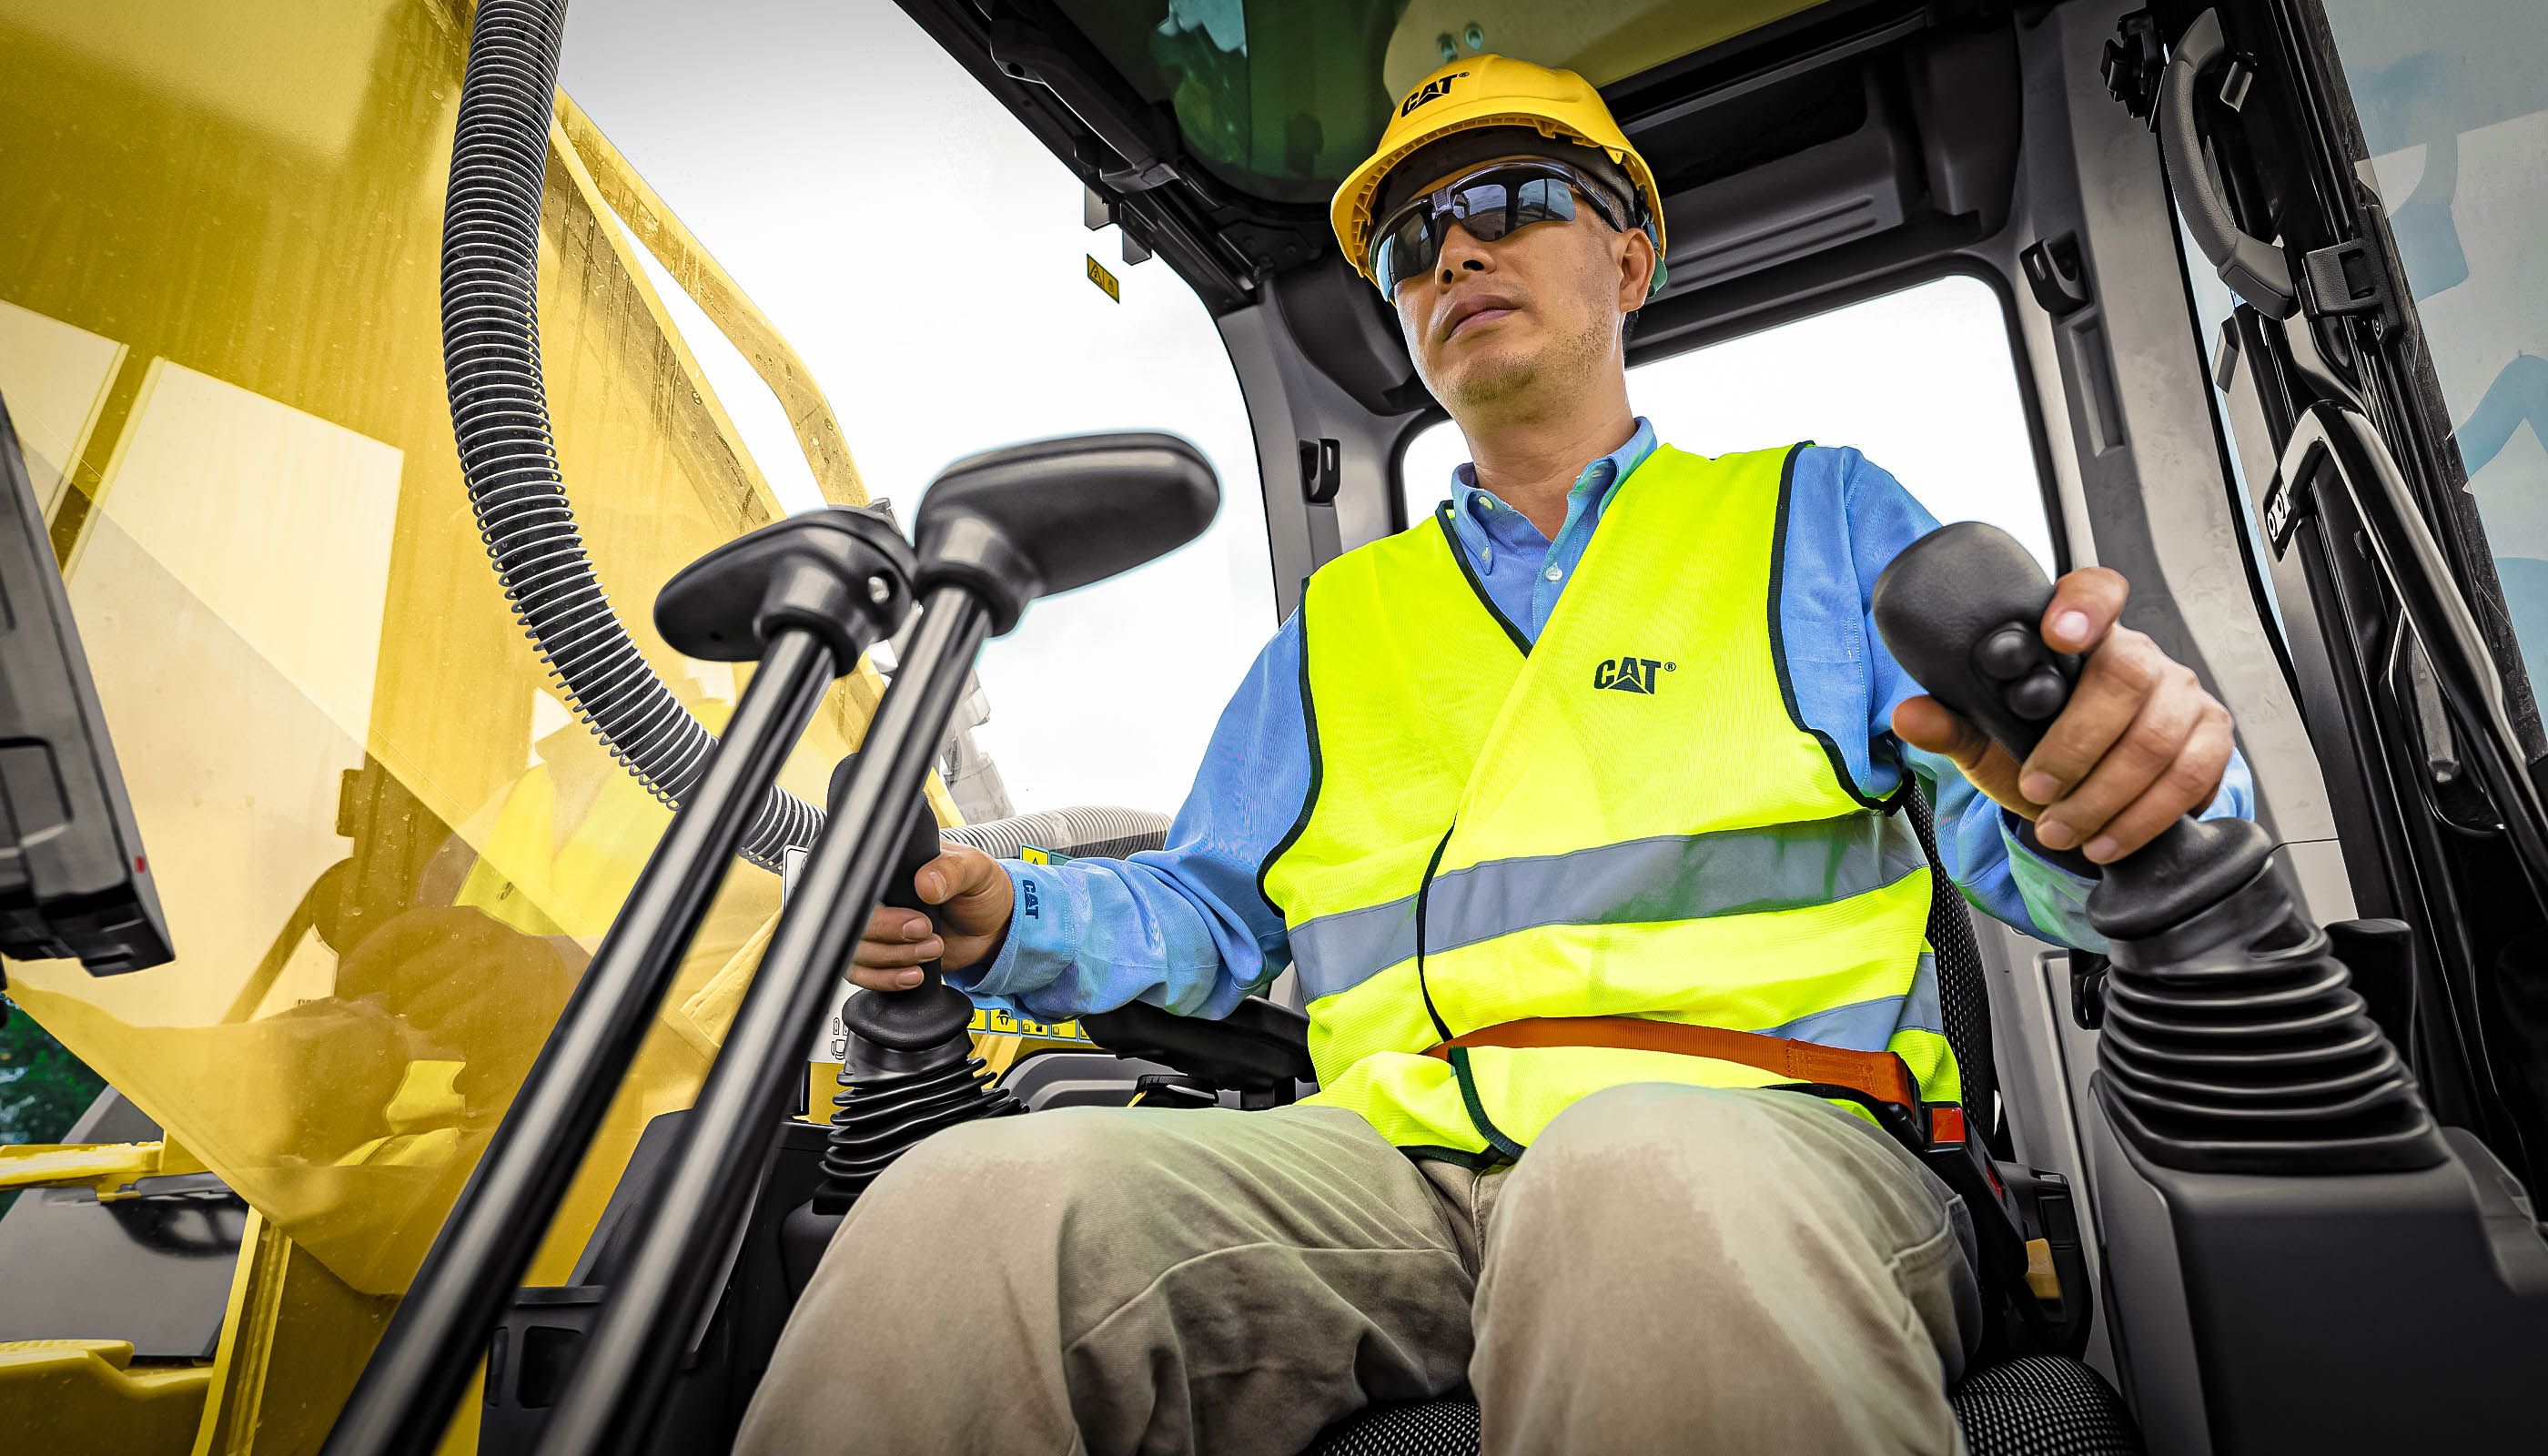 Top 5 Tips for Safely Operating Heavy Equipment